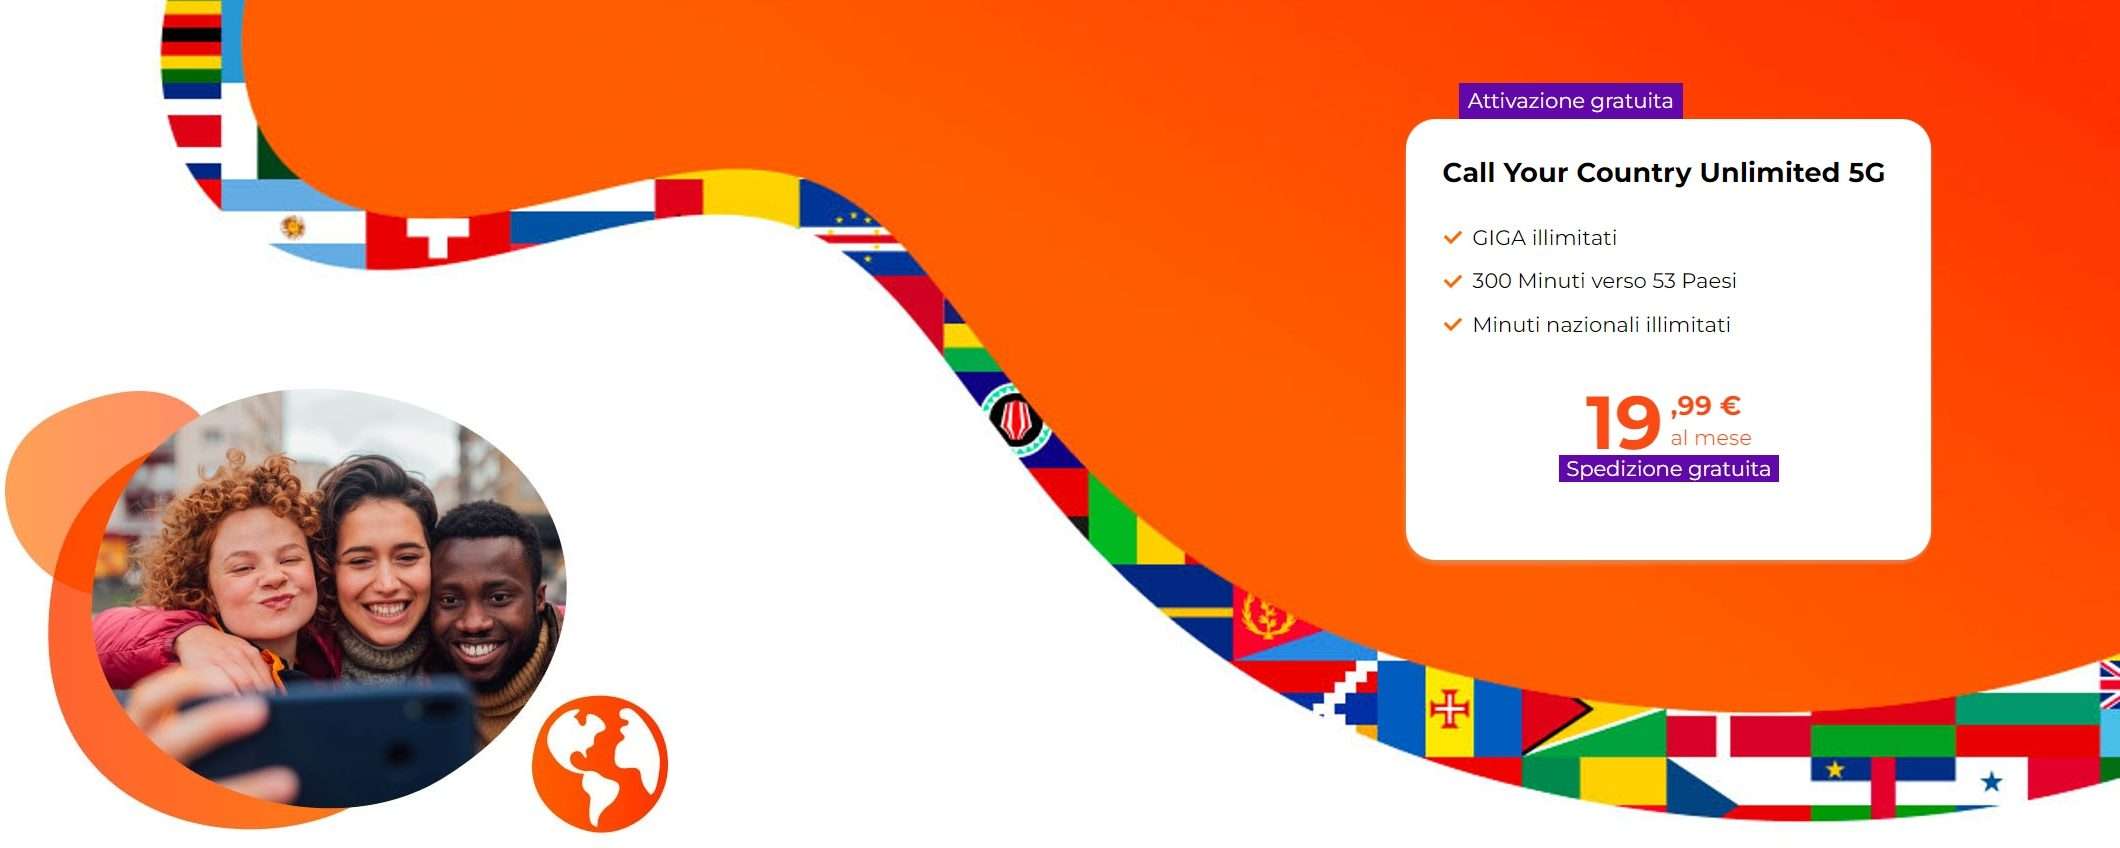 WINDTRE: NUOVA Call Your Country Unlimited 5G a 19,99€